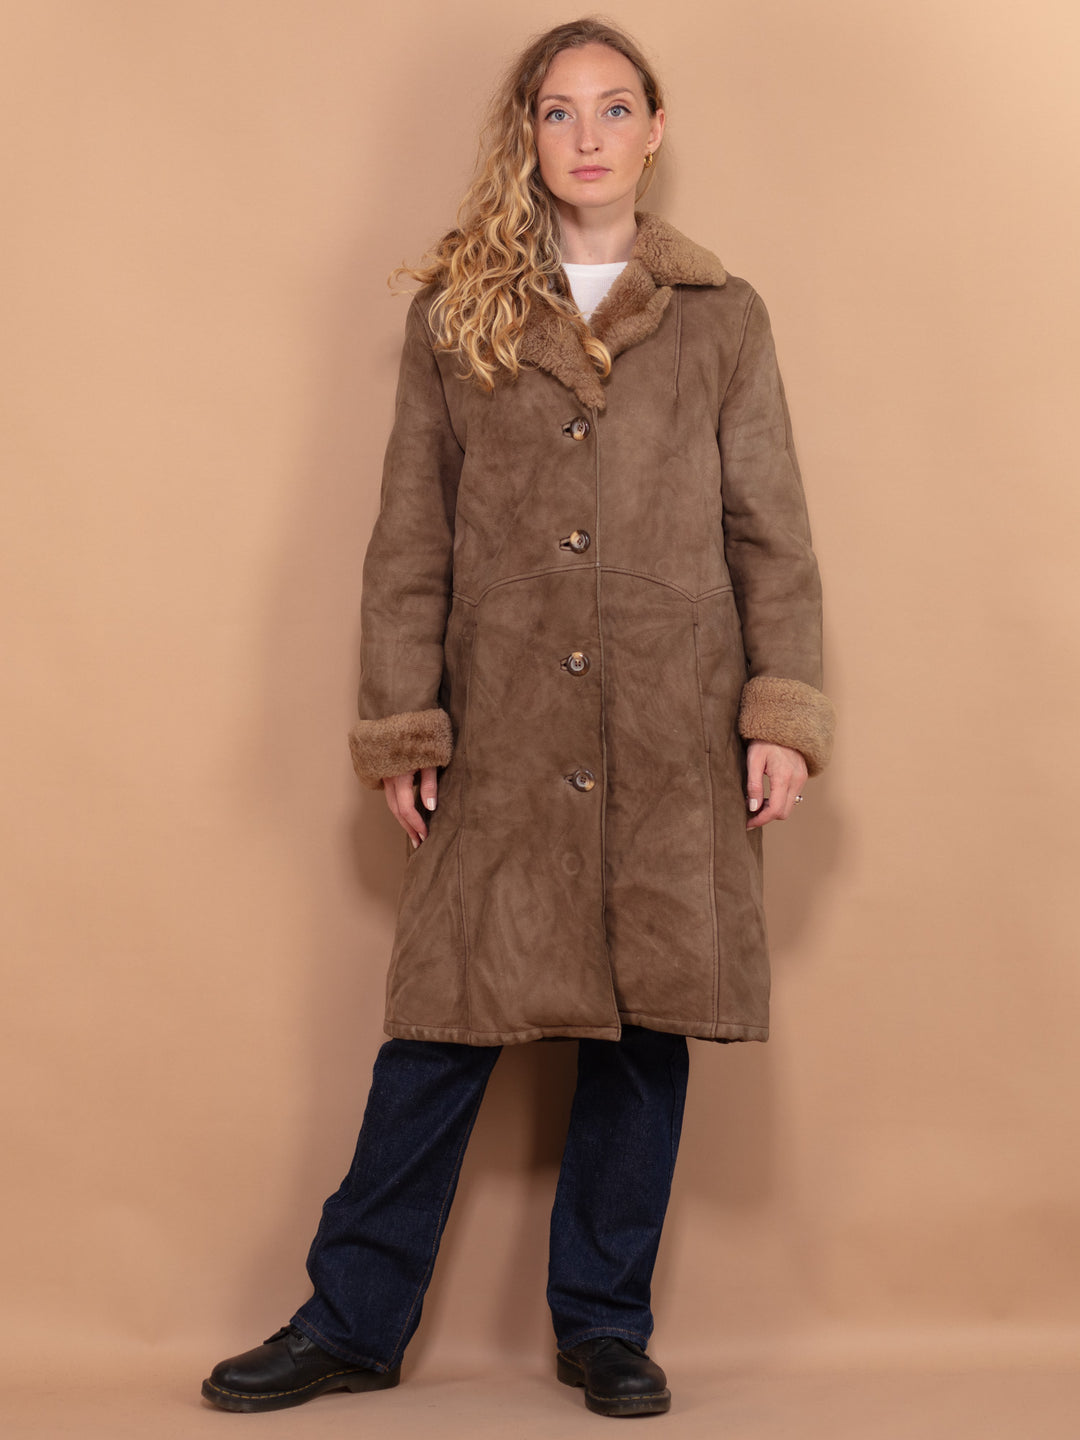 Shearling Suede Coat 70, Size Small, Vintage Suede Coat, Shearling Wool Coat, Afghan Sheepskin Coat, Wester Cowgirl Coat, Retro Outerwear